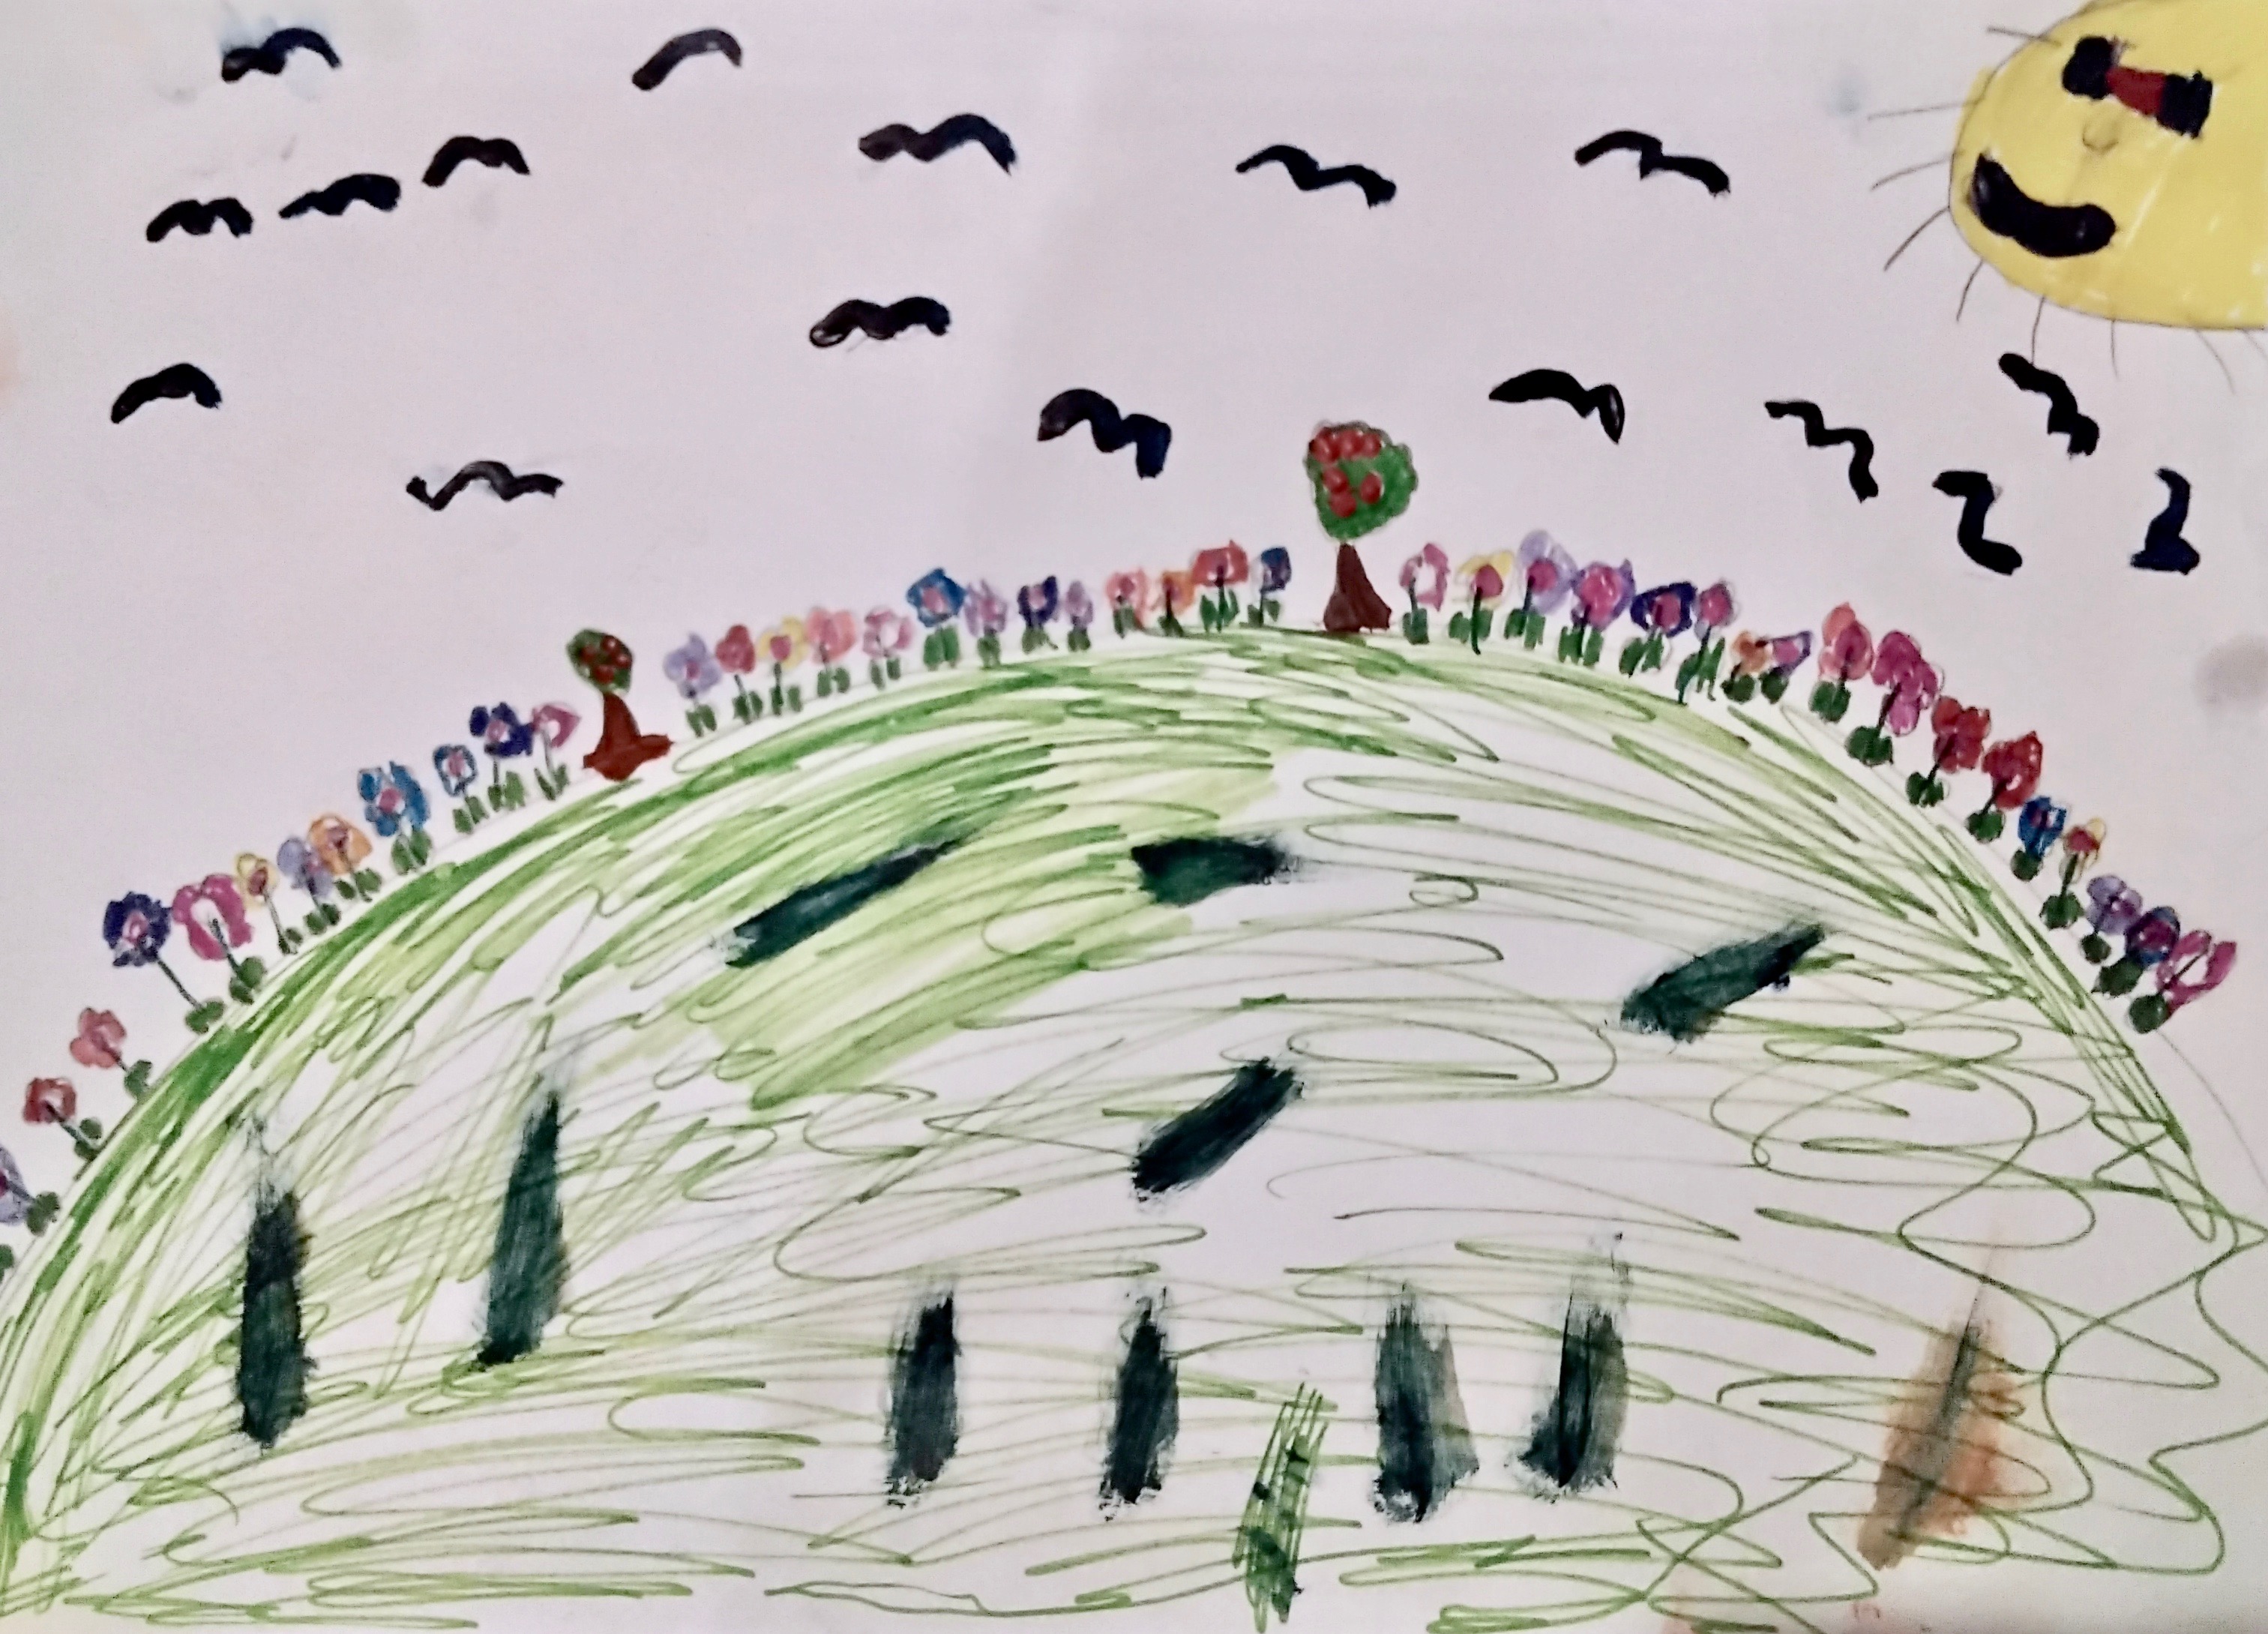 'Sunny Hill' by Cora (7) from Laois